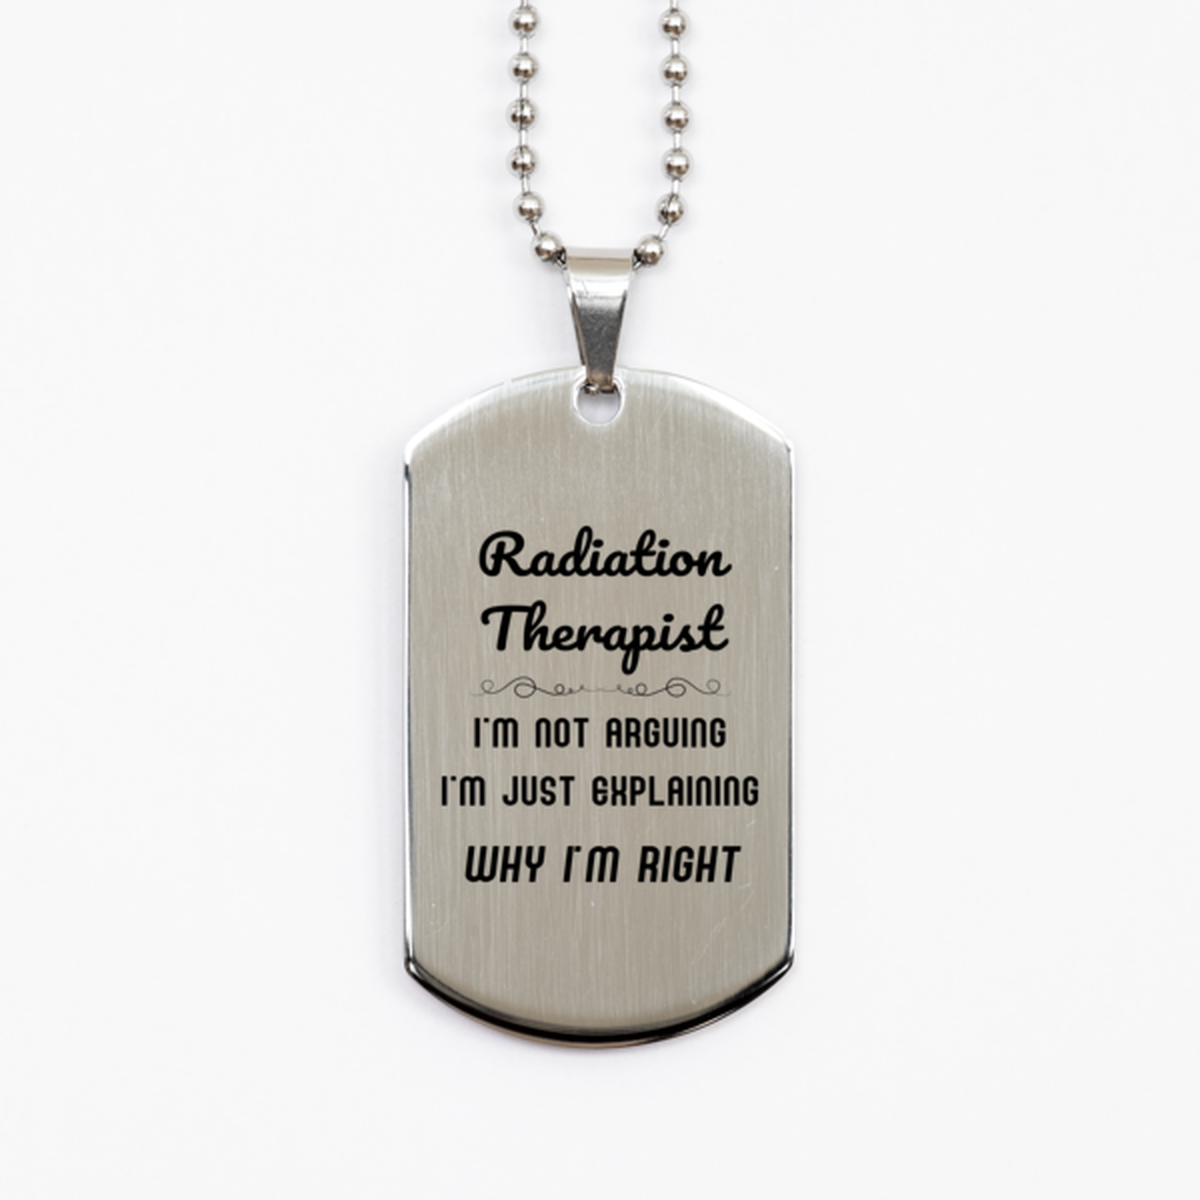 Radiation Therapist I'm not Arguing. I'm Just Explaining Why I'm RIGHT Silver Dog Tag, Funny Saying Quote Radiation Therapist Gifts For Radiation Therapist Graduation Birthday Christmas Gifts for Men Women Coworker